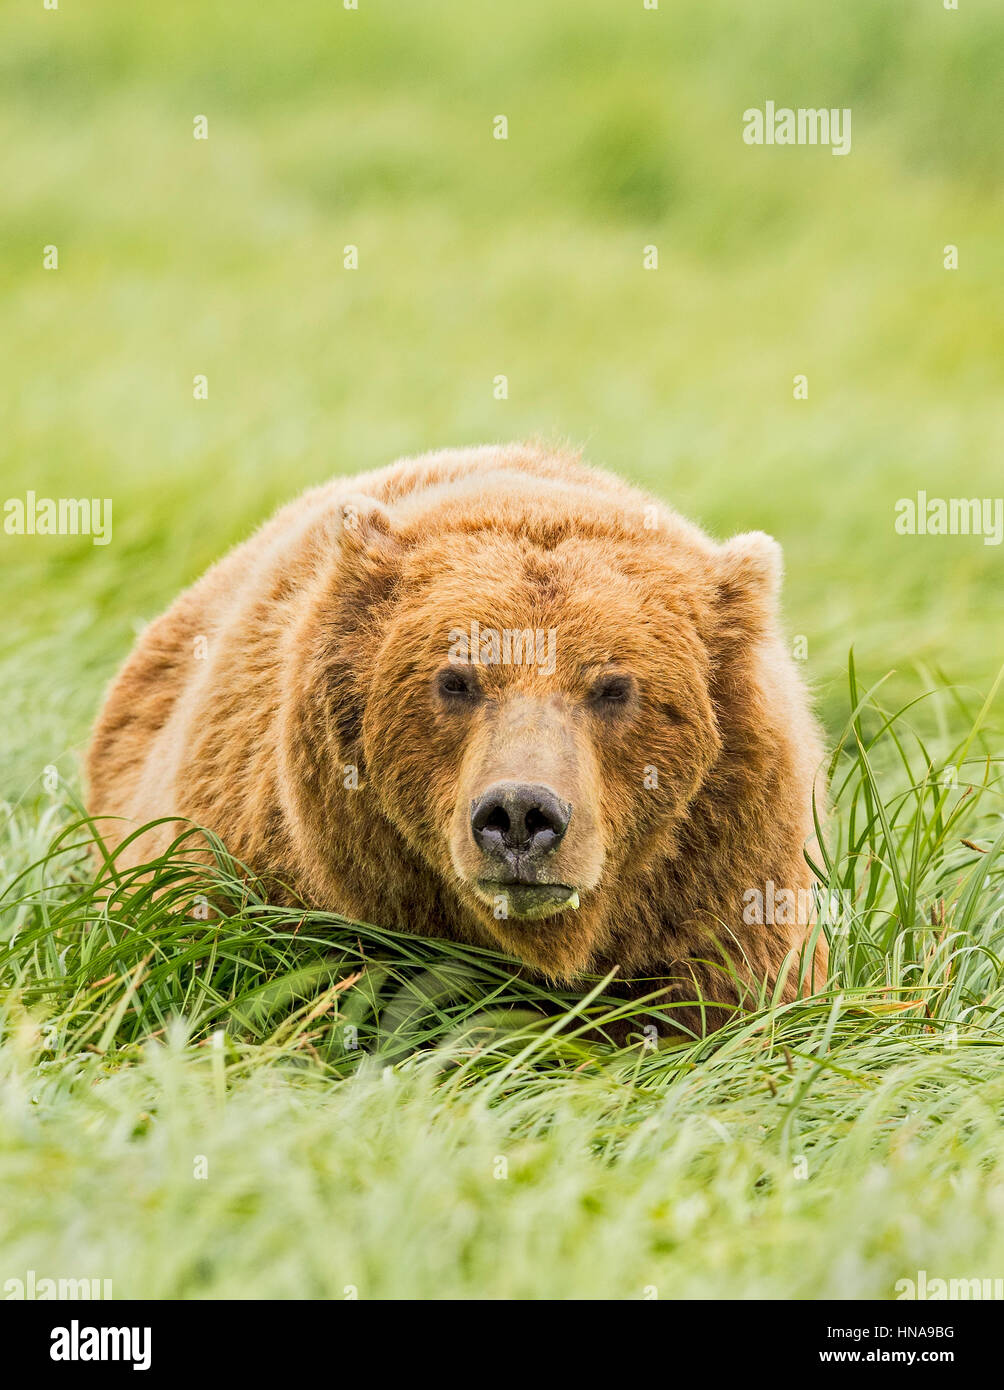 A brown bear (Ursus arctos) stops to take a bite of grasses in the sedge meadow at McNeil River State Game Sanctuary, Alaska Stock Photo